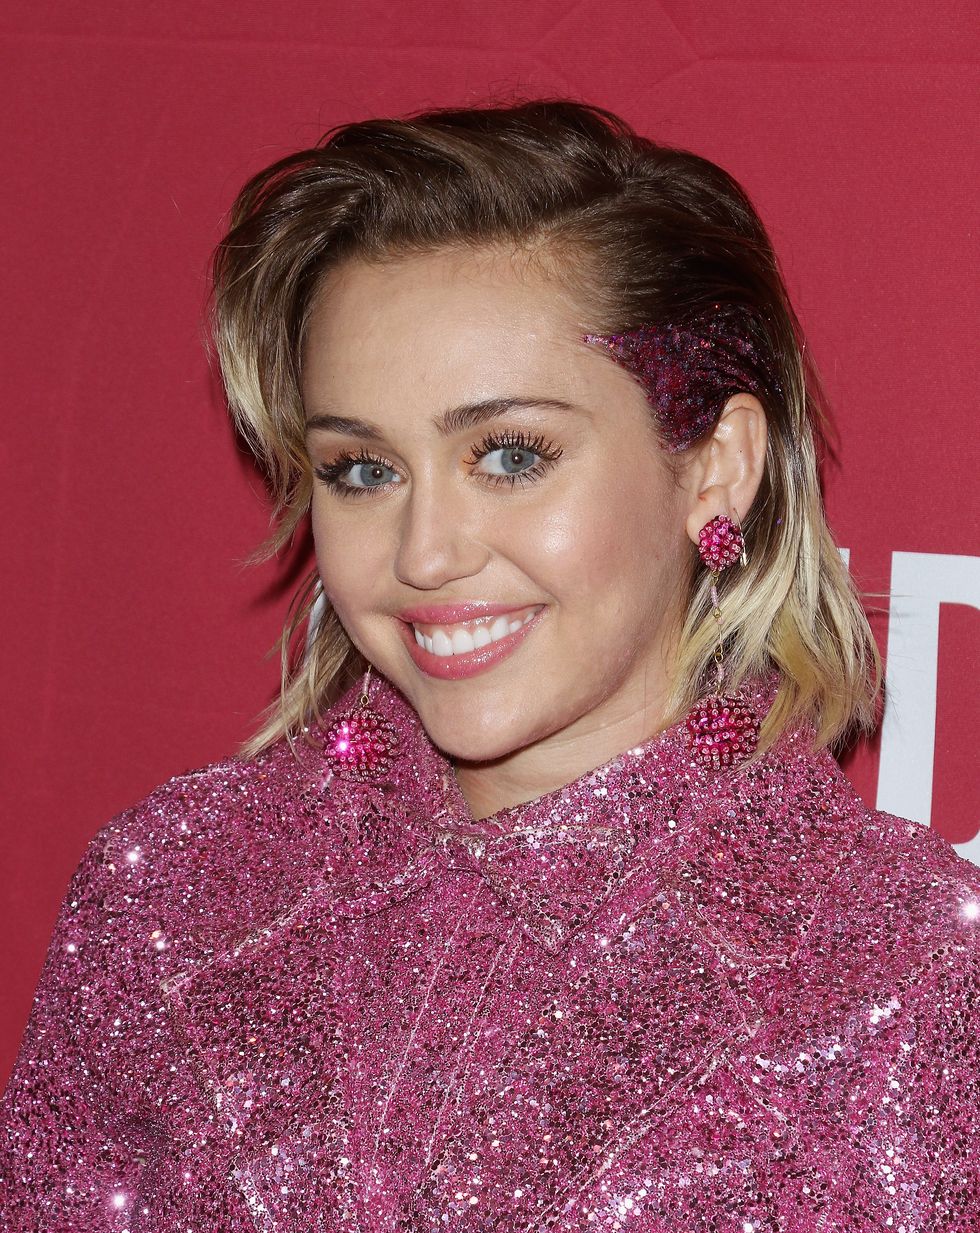 Miley Cyrus wearing pink glitter at a concert to mark World Aids Day